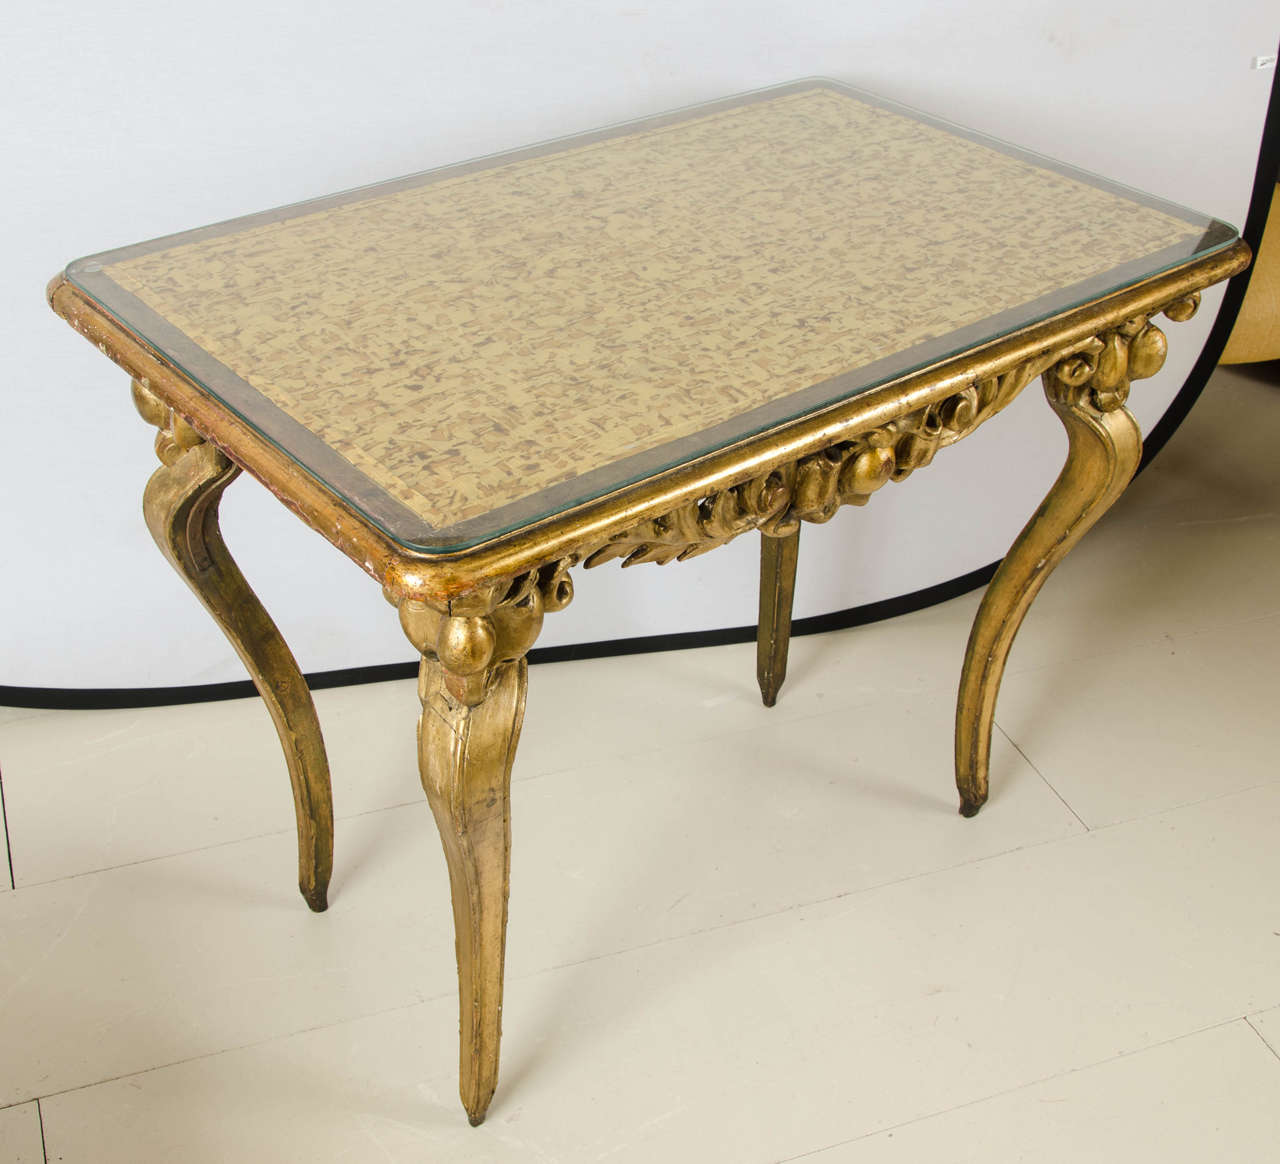 Italian giltwood center table with later Japanese silk top.